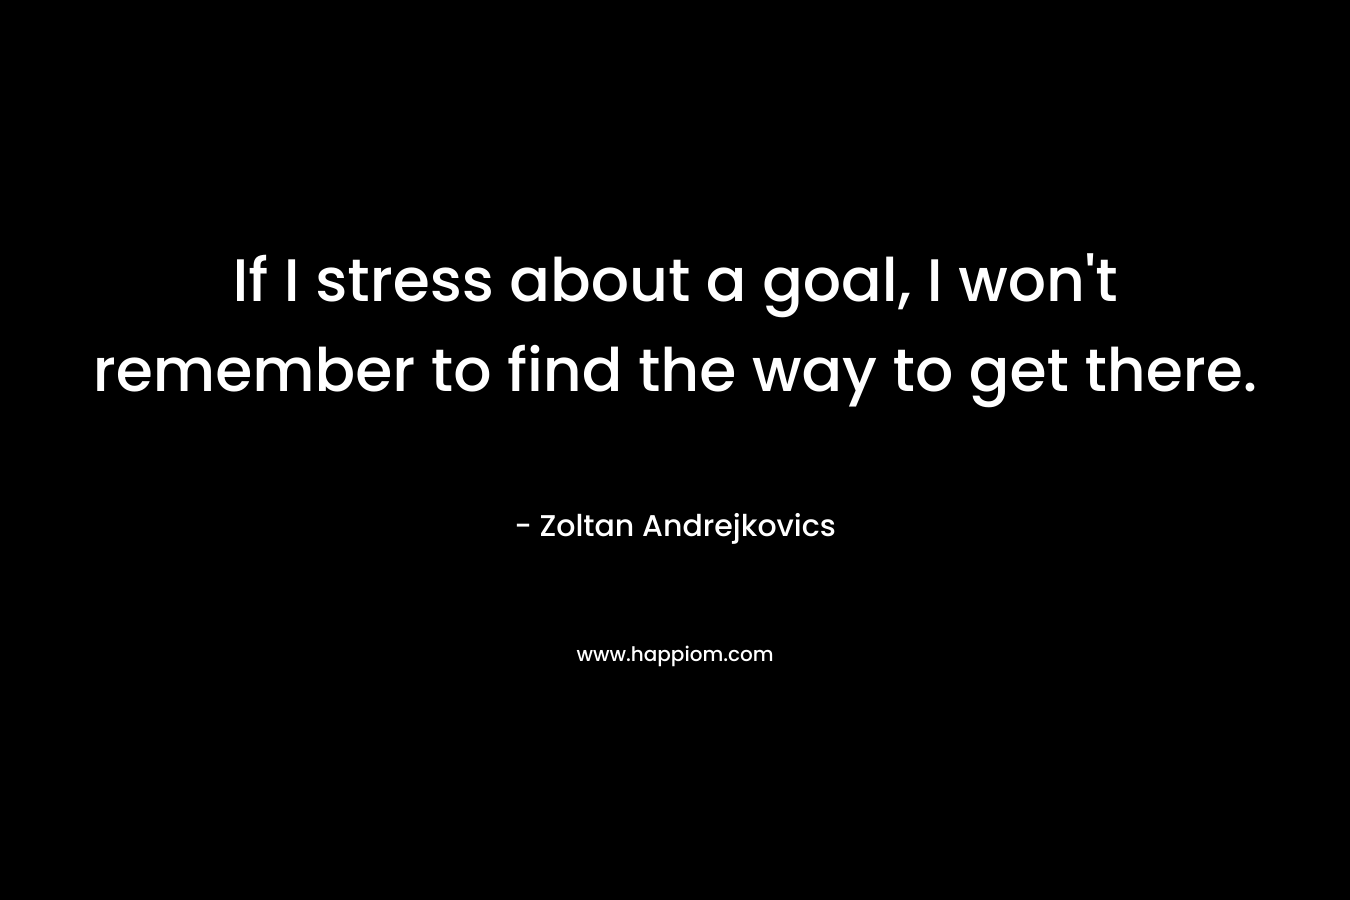 If I stress about a goal, I won't remember to find the way to get there.